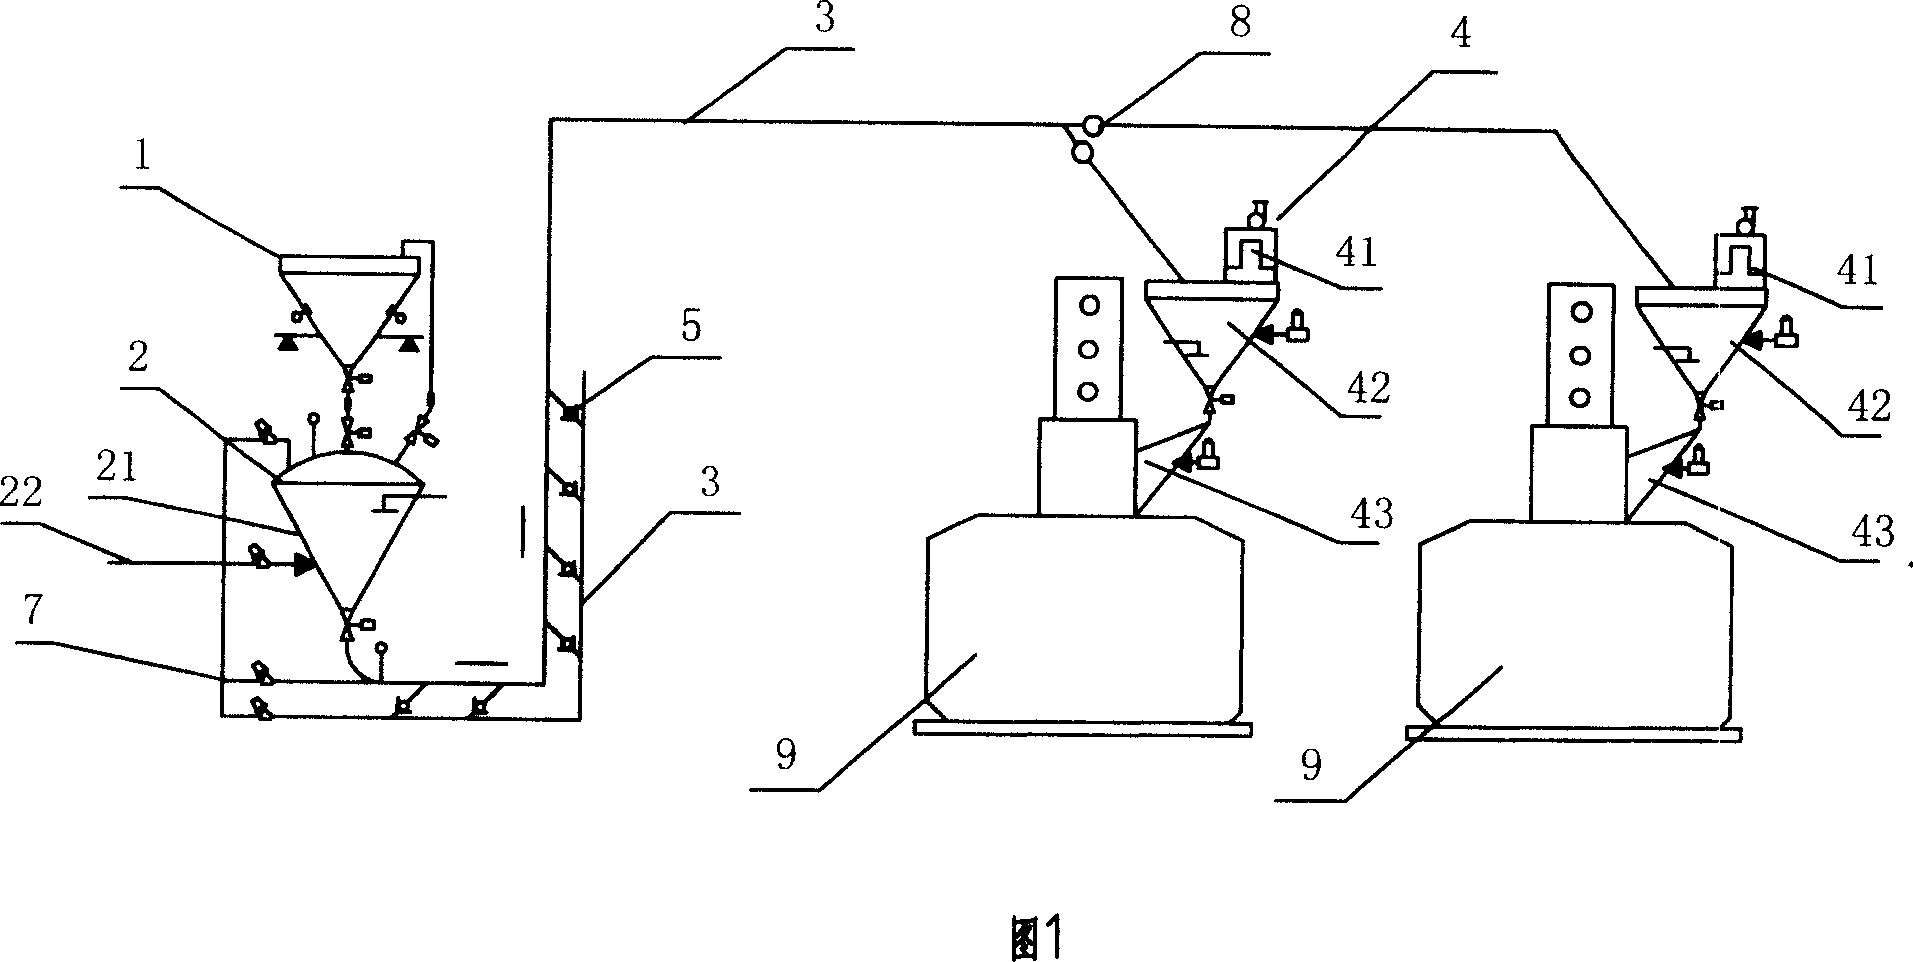 Distribution method of implementing remote weighing transporting